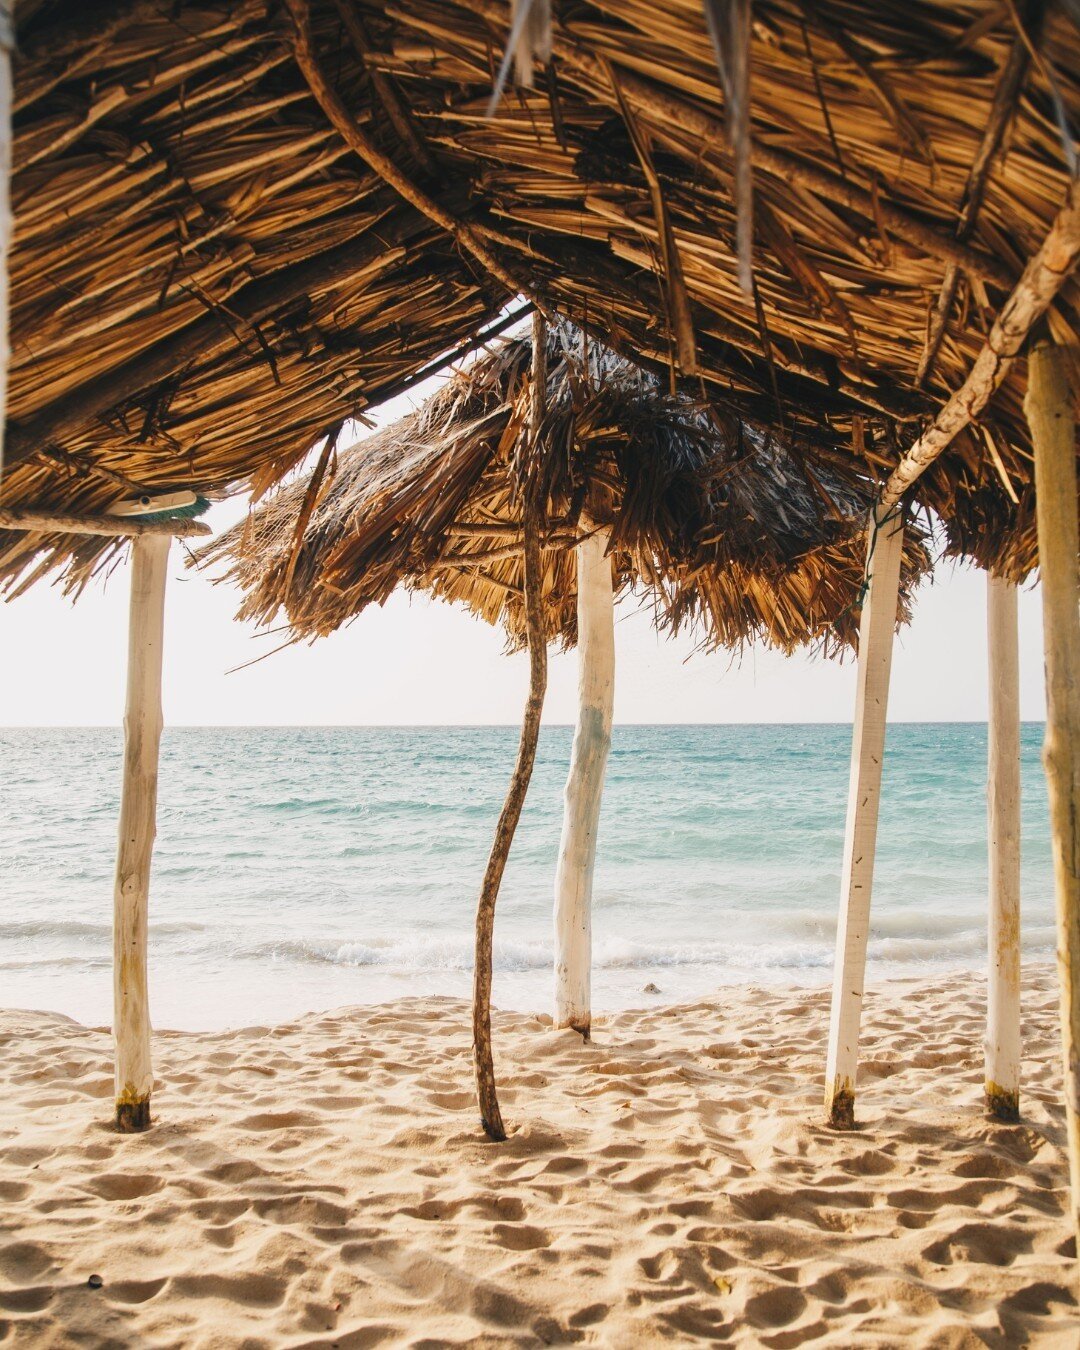 &ldquo;Let the waves hit your feet, and the sand be your seat.&rdquo;
Book our villa at https://airbnb.com/h/casa-cartagena or by contacting +57 321 518 3868

#casalacartujita #privatevilla #luxuryvilla #luxuryvillacartagena #privatevillacartagena #d